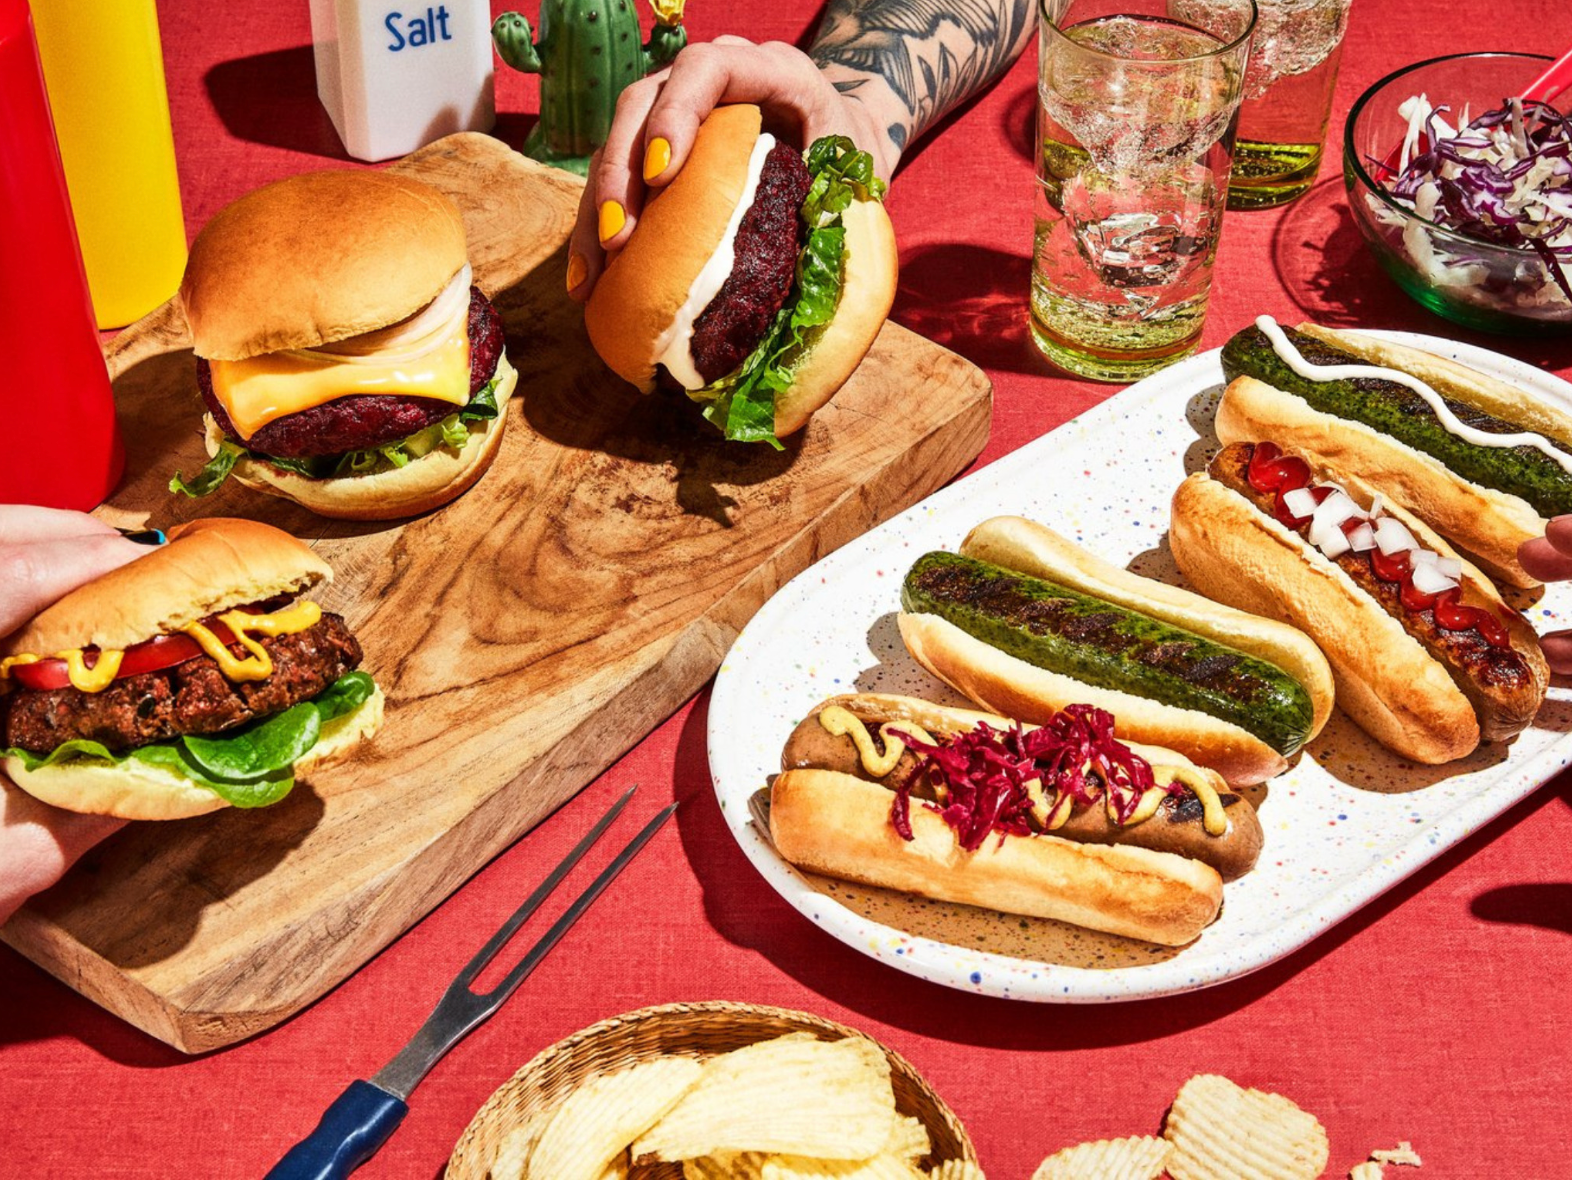 a table set with hot dogs and burgers, some brown and some noticeably green